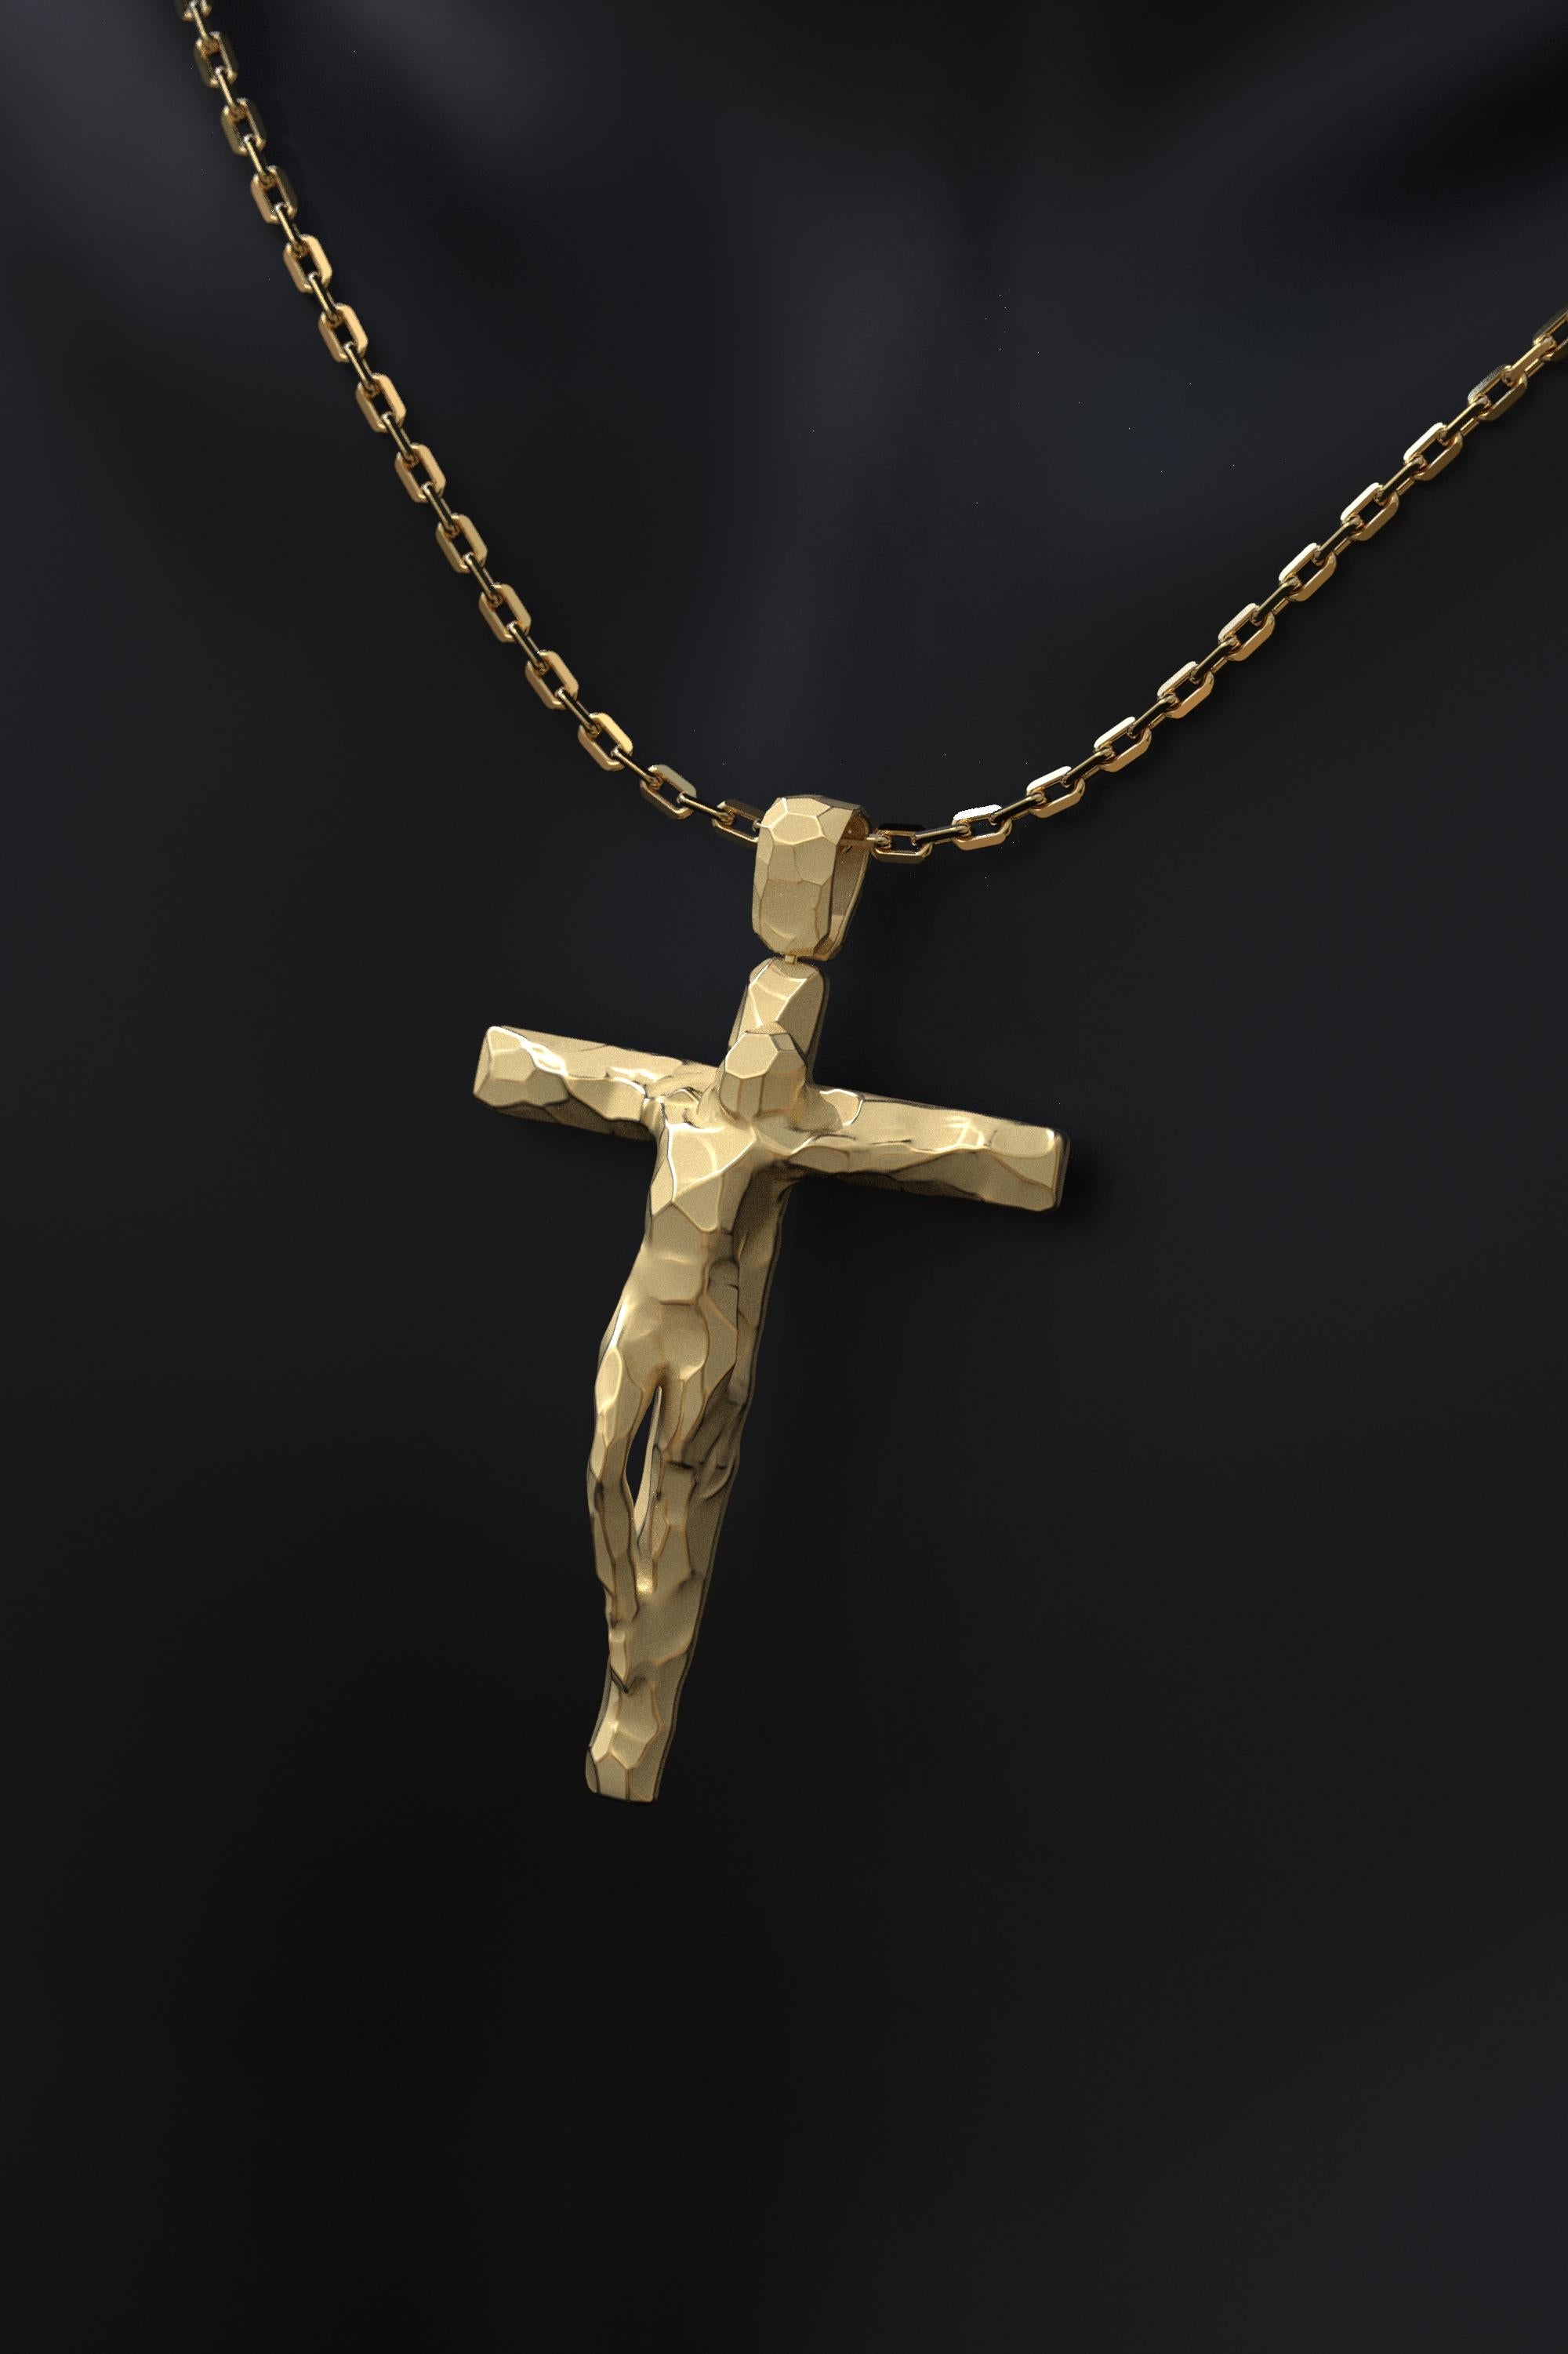 Yfn 14k Solid Gold Cross Necklace For Women Yellow Gold Italian Diamond-cut Cross  Pendant Necklaces Religious Jewelry - Necklaces - AliExpress